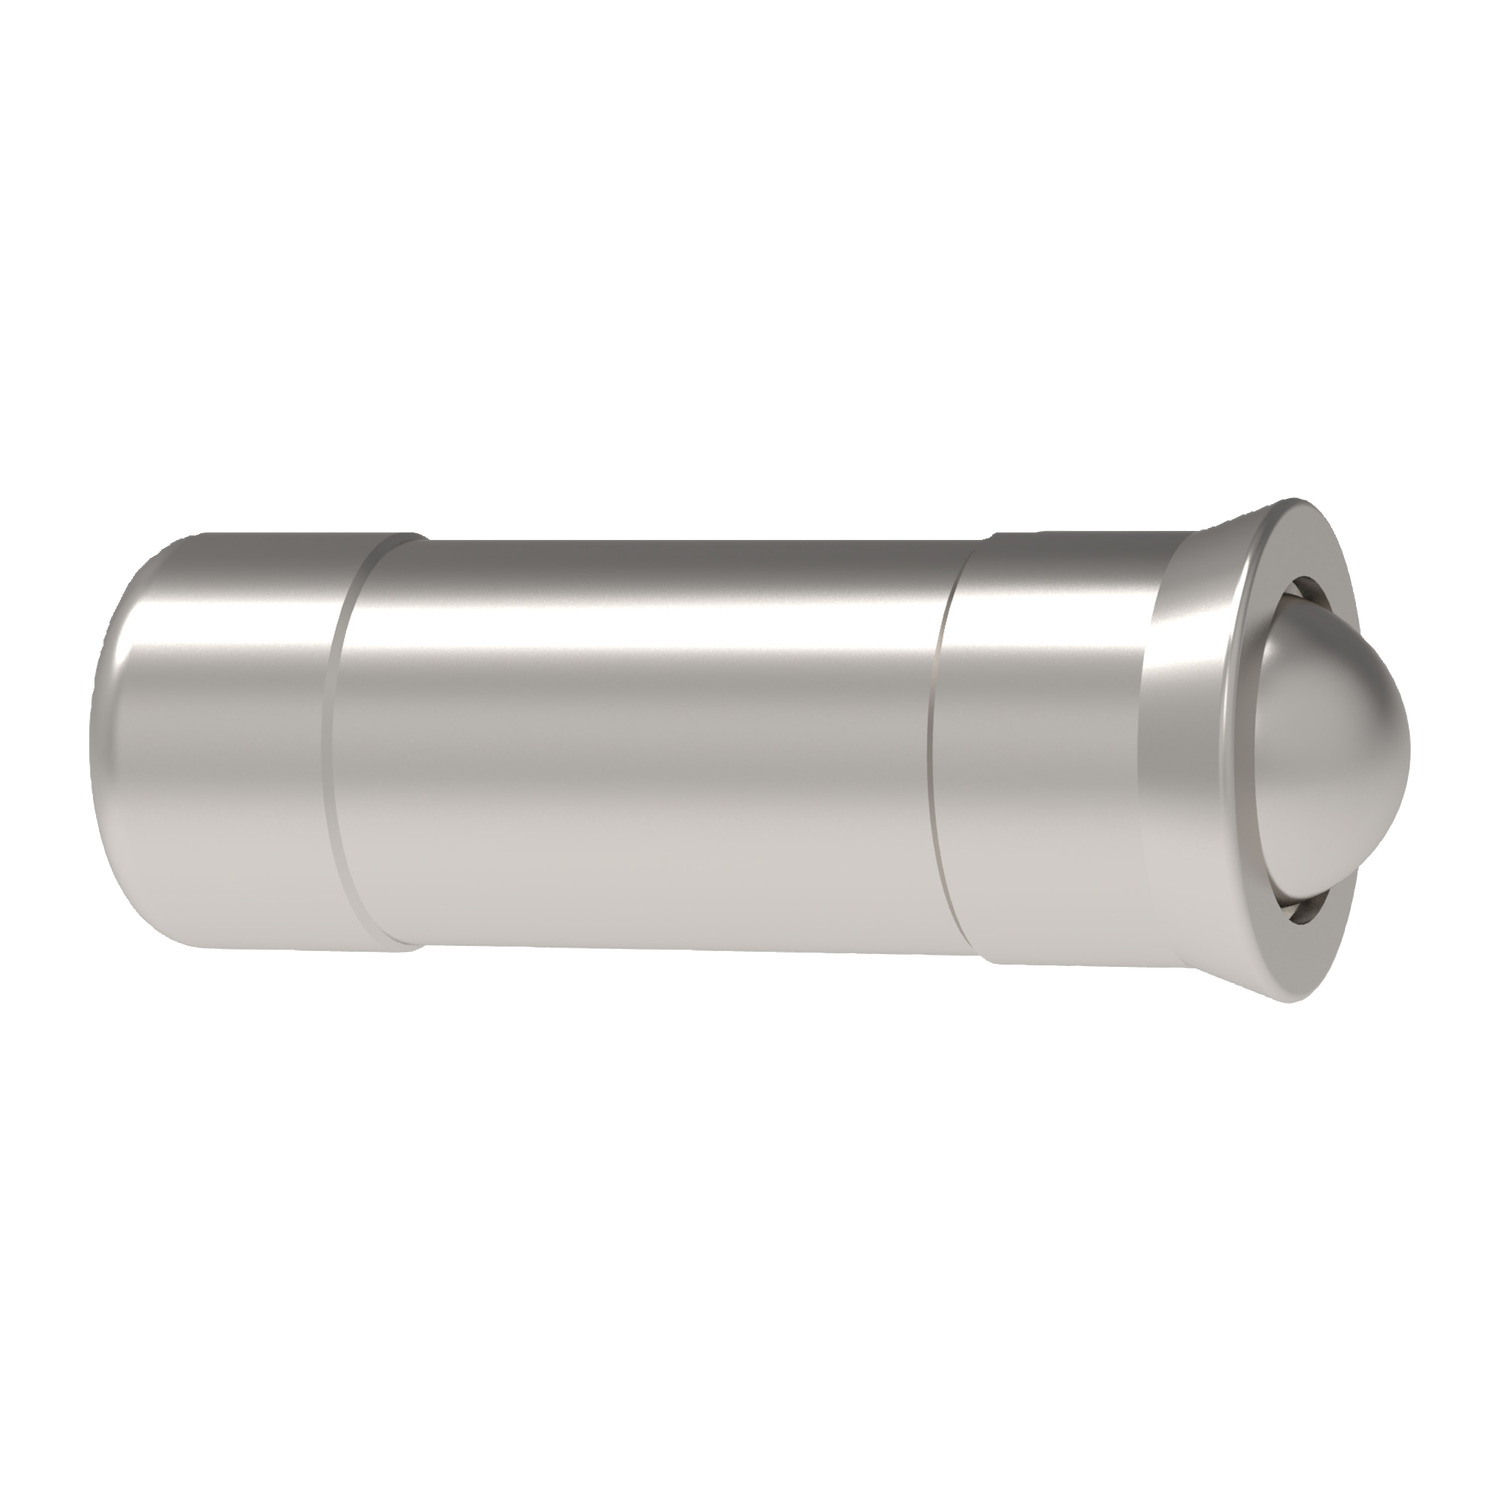 Product 32284, Spring Plunger - Ball End - Smooth stainless steel - with collar / 